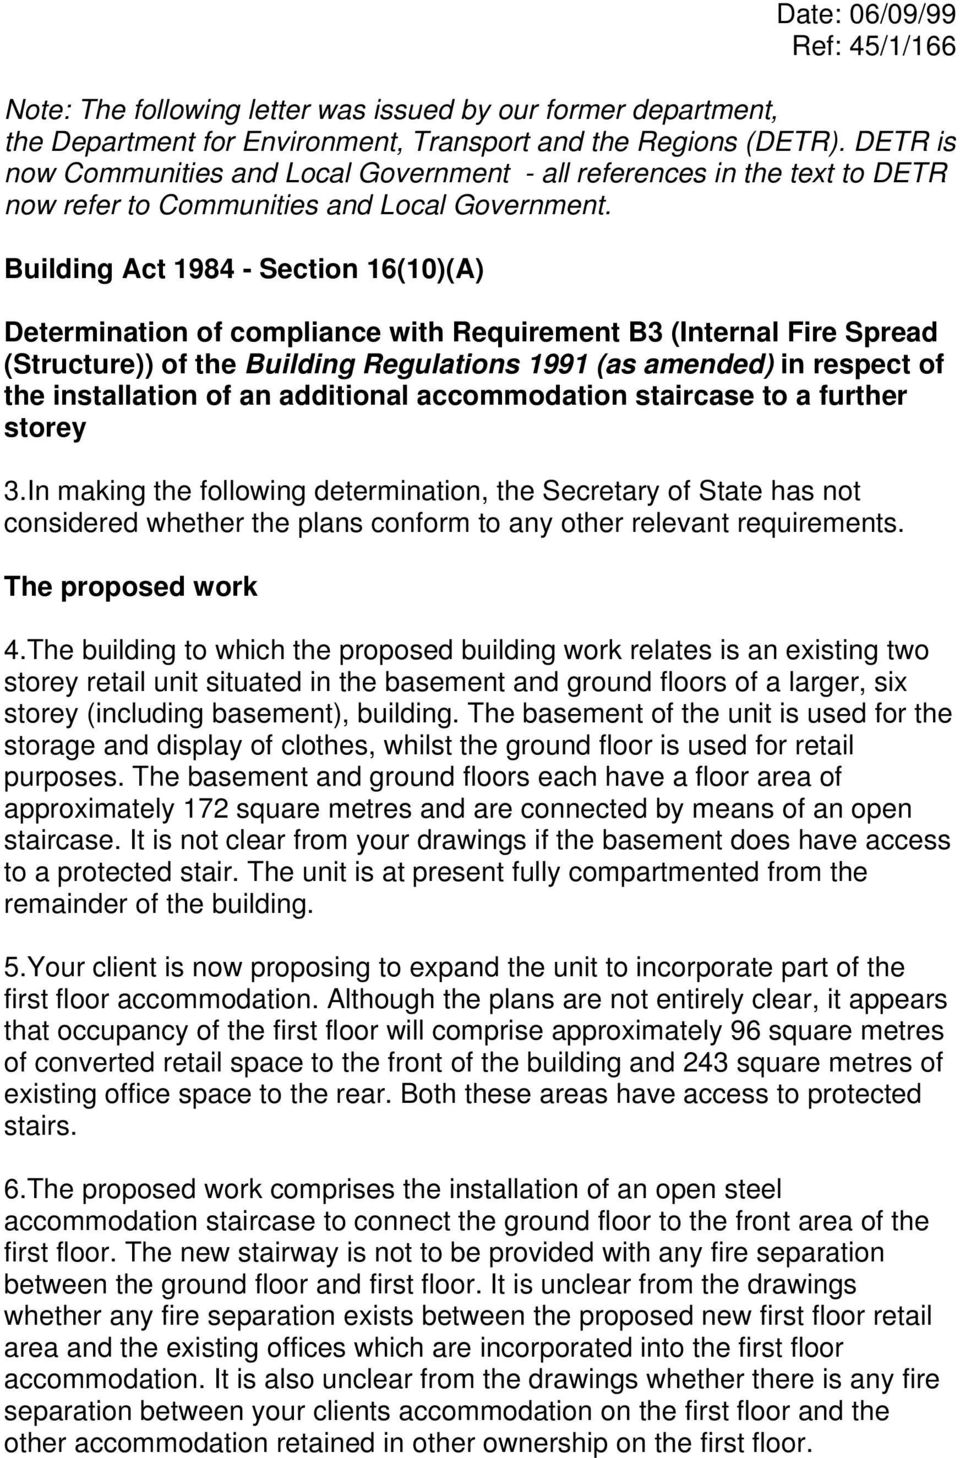 Building Act 1984 - Section 16(10)(A) Determination of compliance with Requirement B3 (Internal Fire Spread (Structure)) of the Building Regulations 1991 (as amended) in respect of the installation